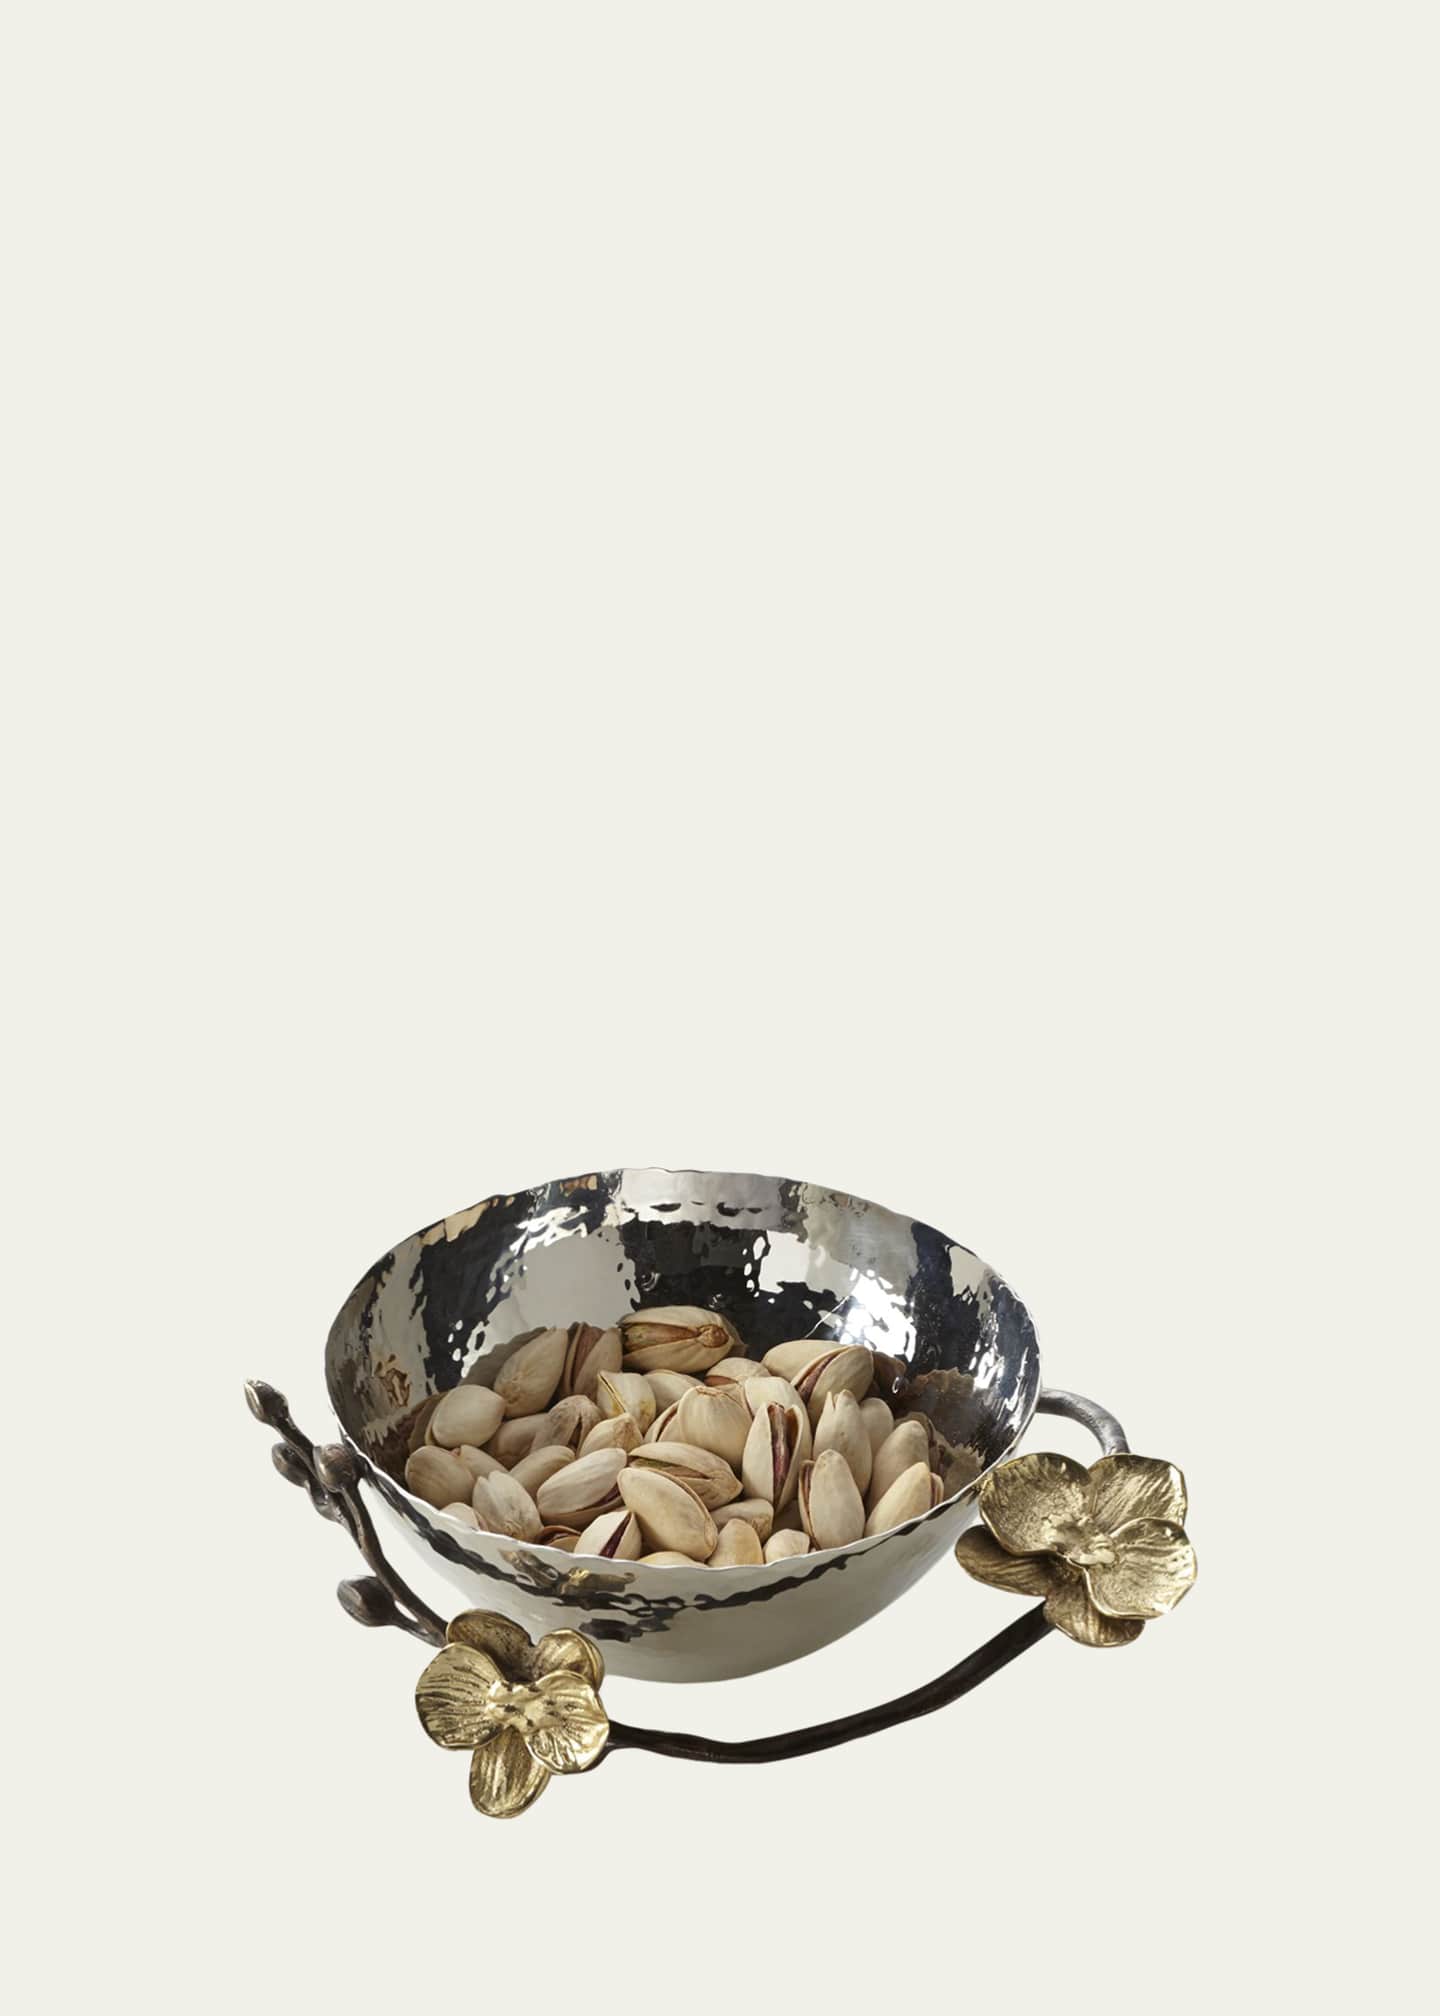 Michael Aram Gold Orchid Nut Bowl Image 1 of 2